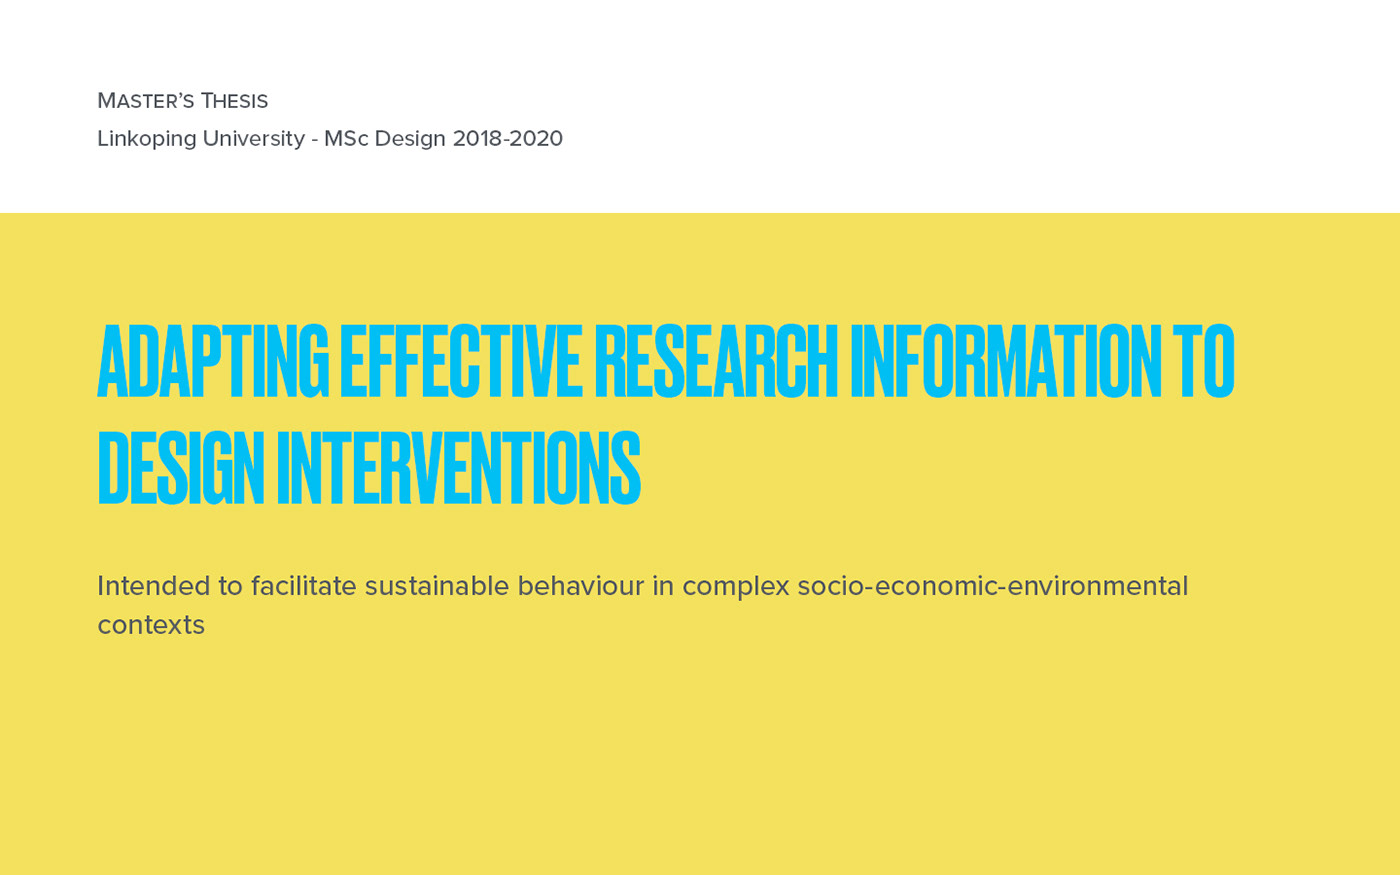 culture design interventions design research Design Toolkit master's thesis social design Sustainability sustainable behaviour